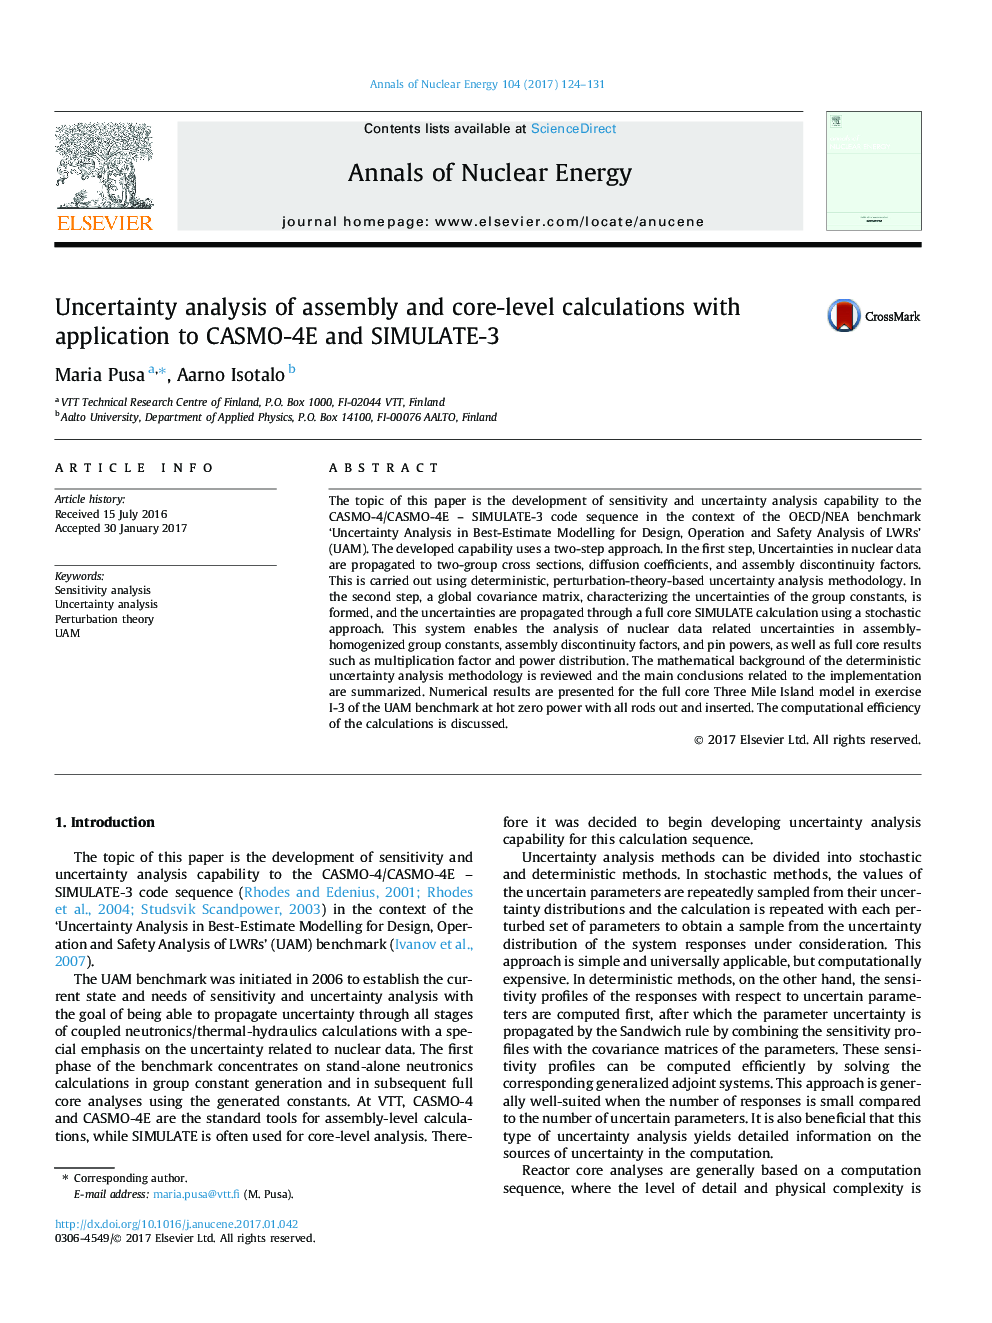 Uncertainty analysis of assembly and core-level calculations with application to CASMO-4E and SIMULATE-3